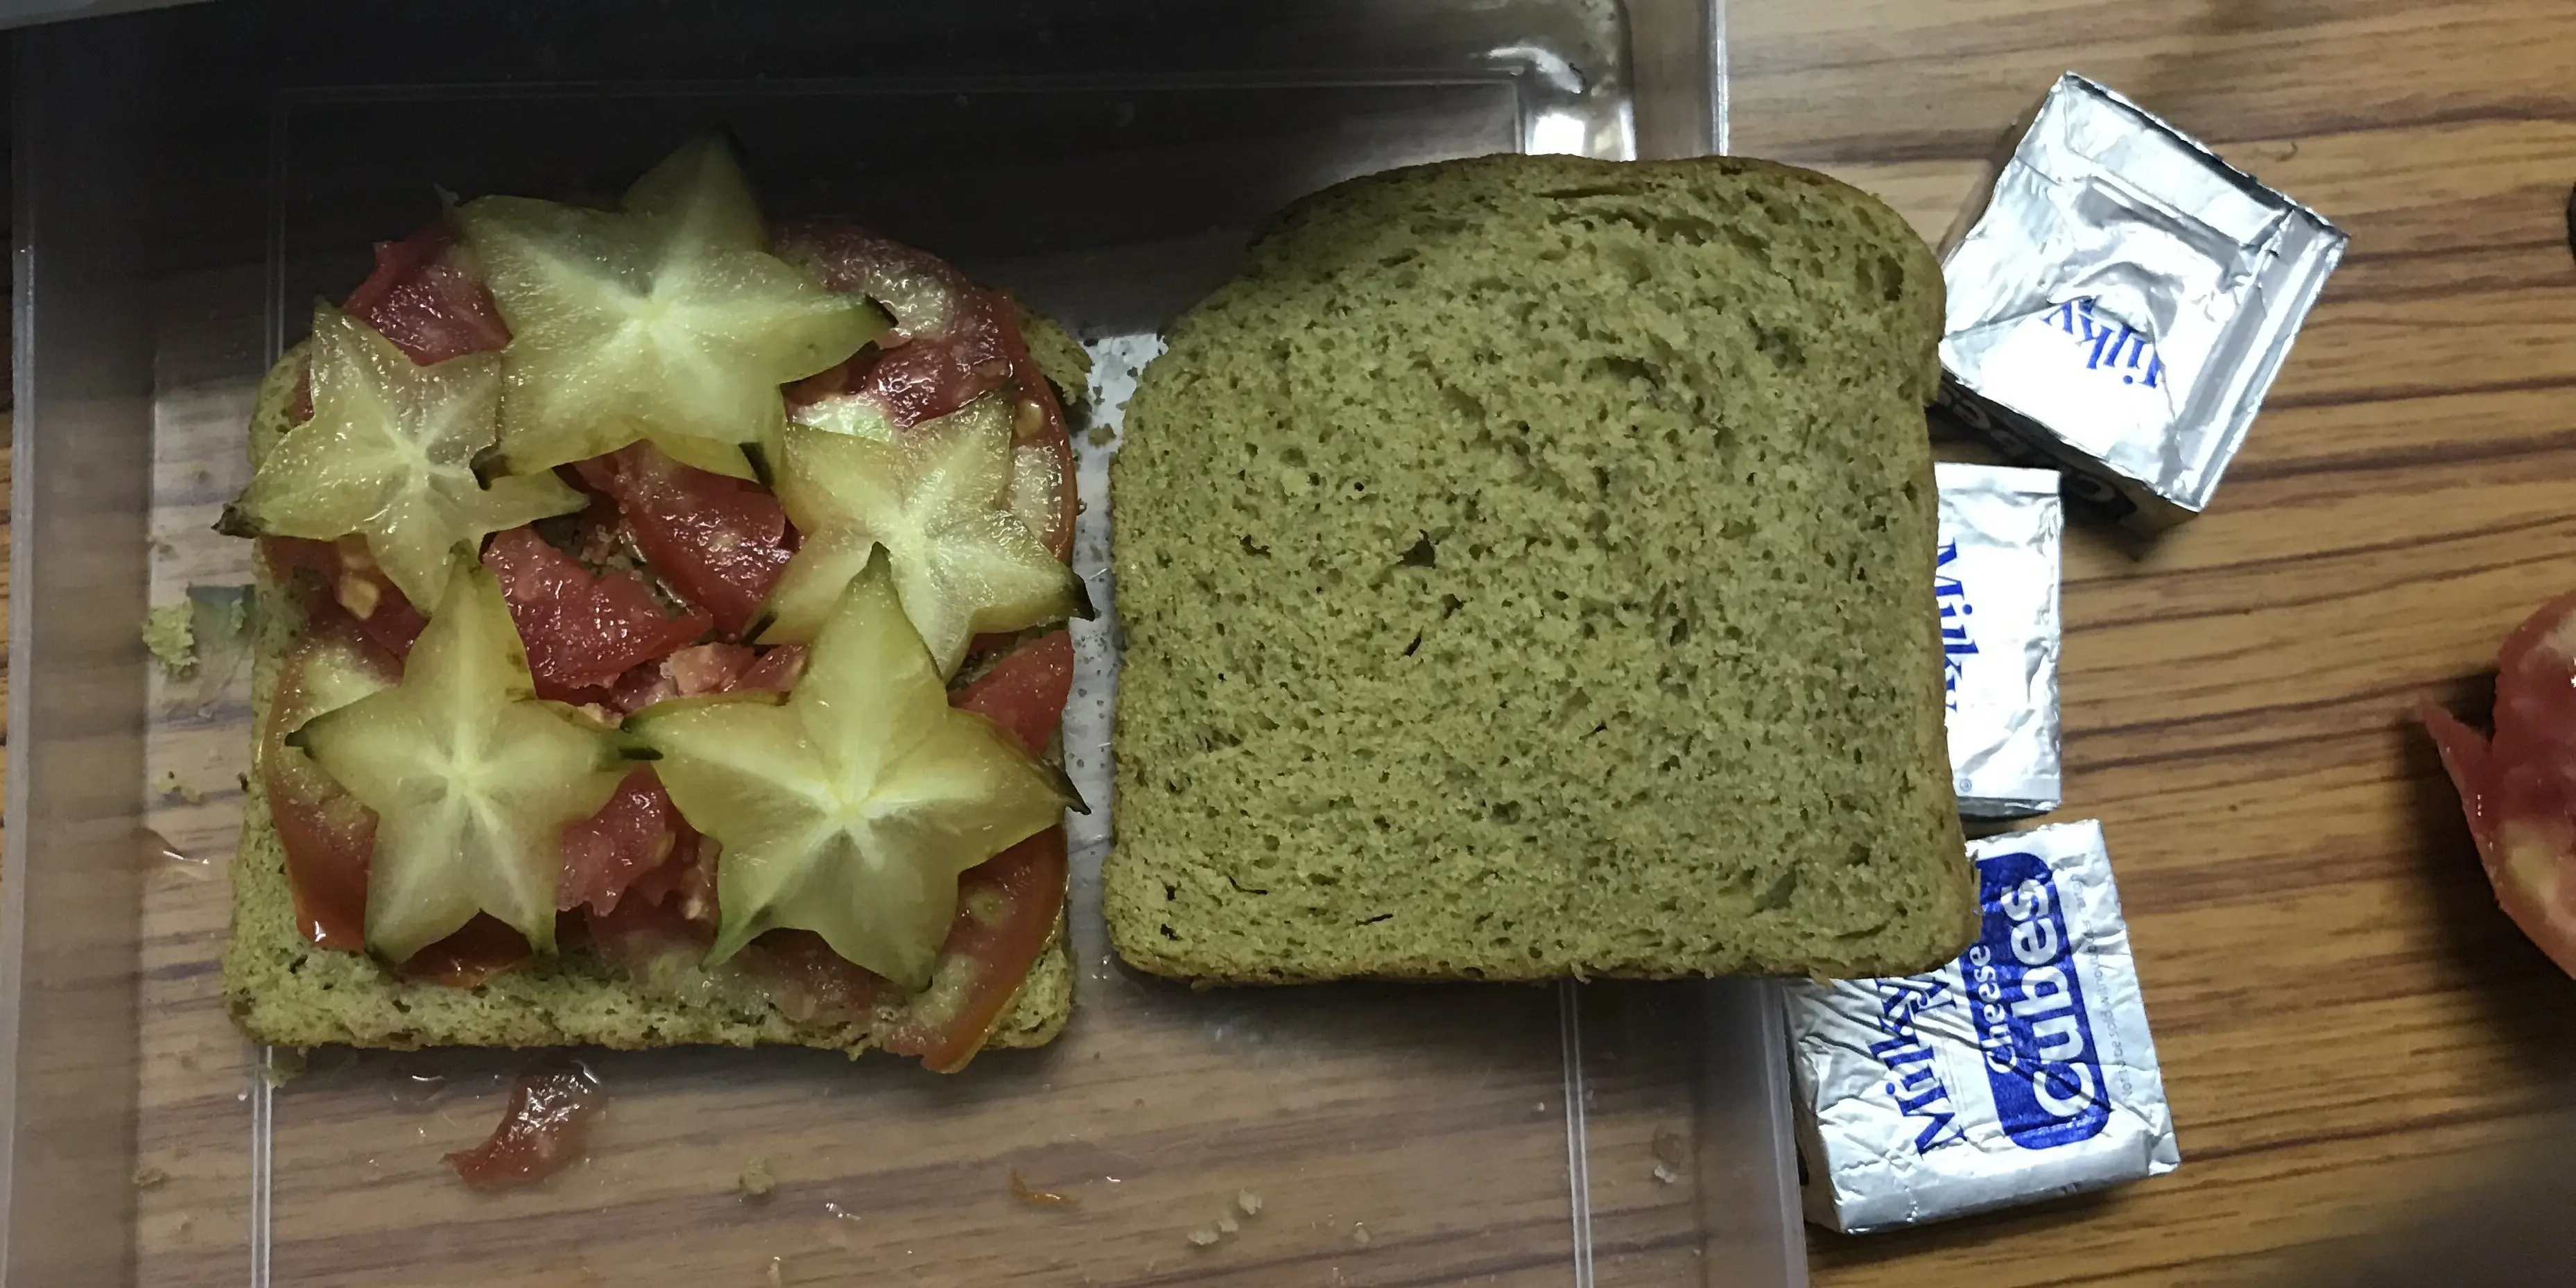 Tomato and starfruit slices placed on a slice of bread.